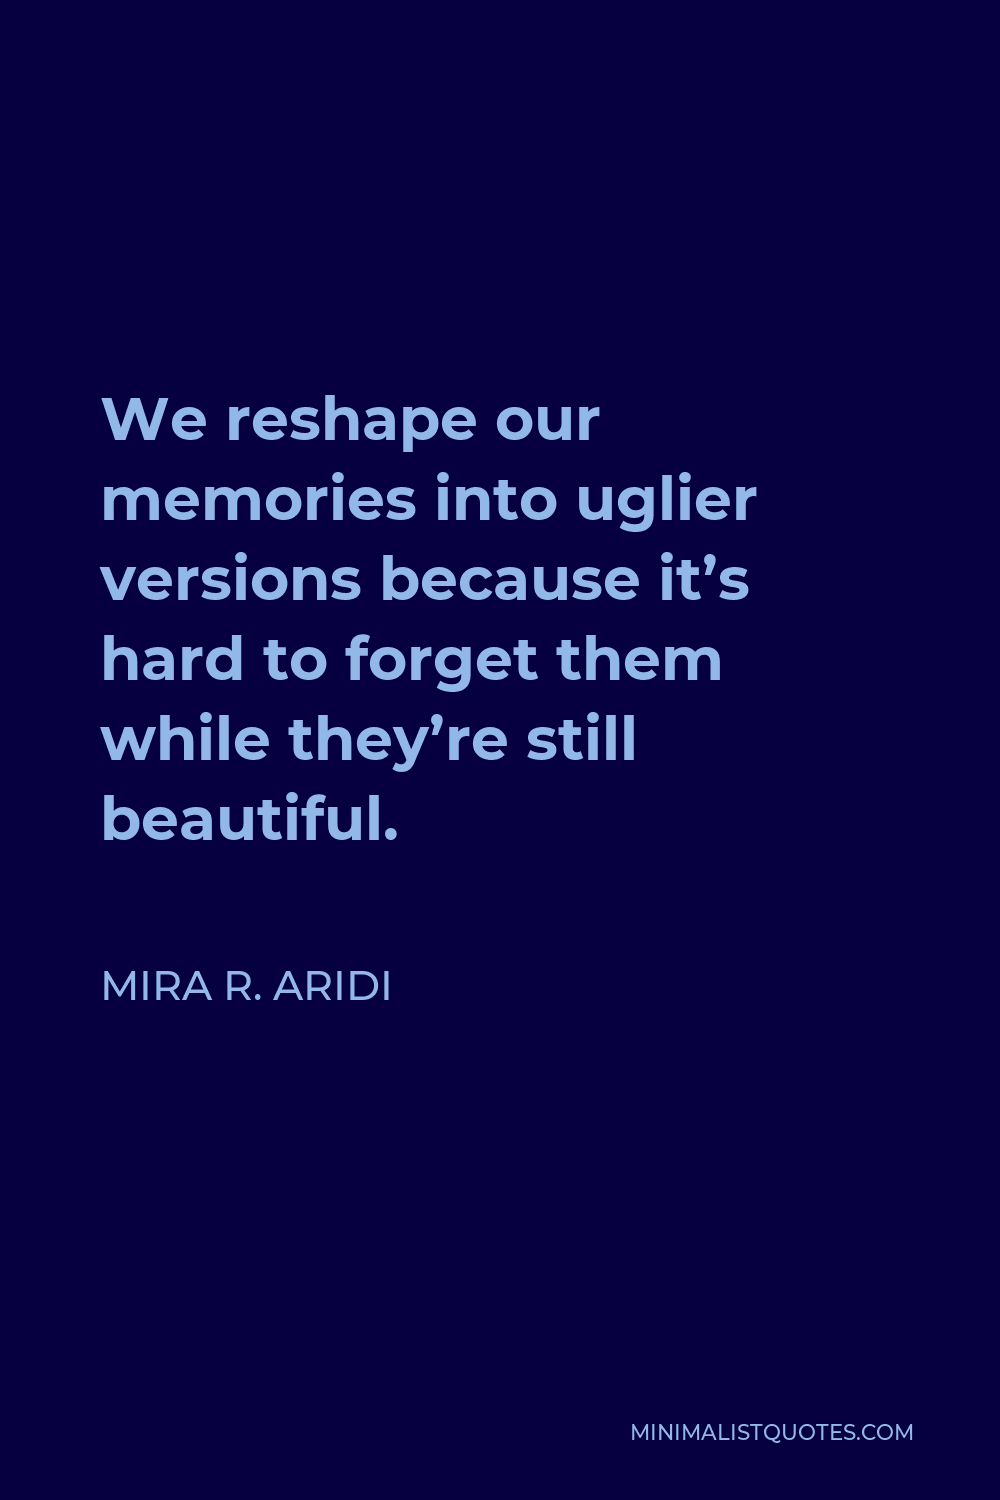 Mira R. Aridi Quote - We reshape our memories into uglier versions because it’s hard to forget them while they’re still beautiful.